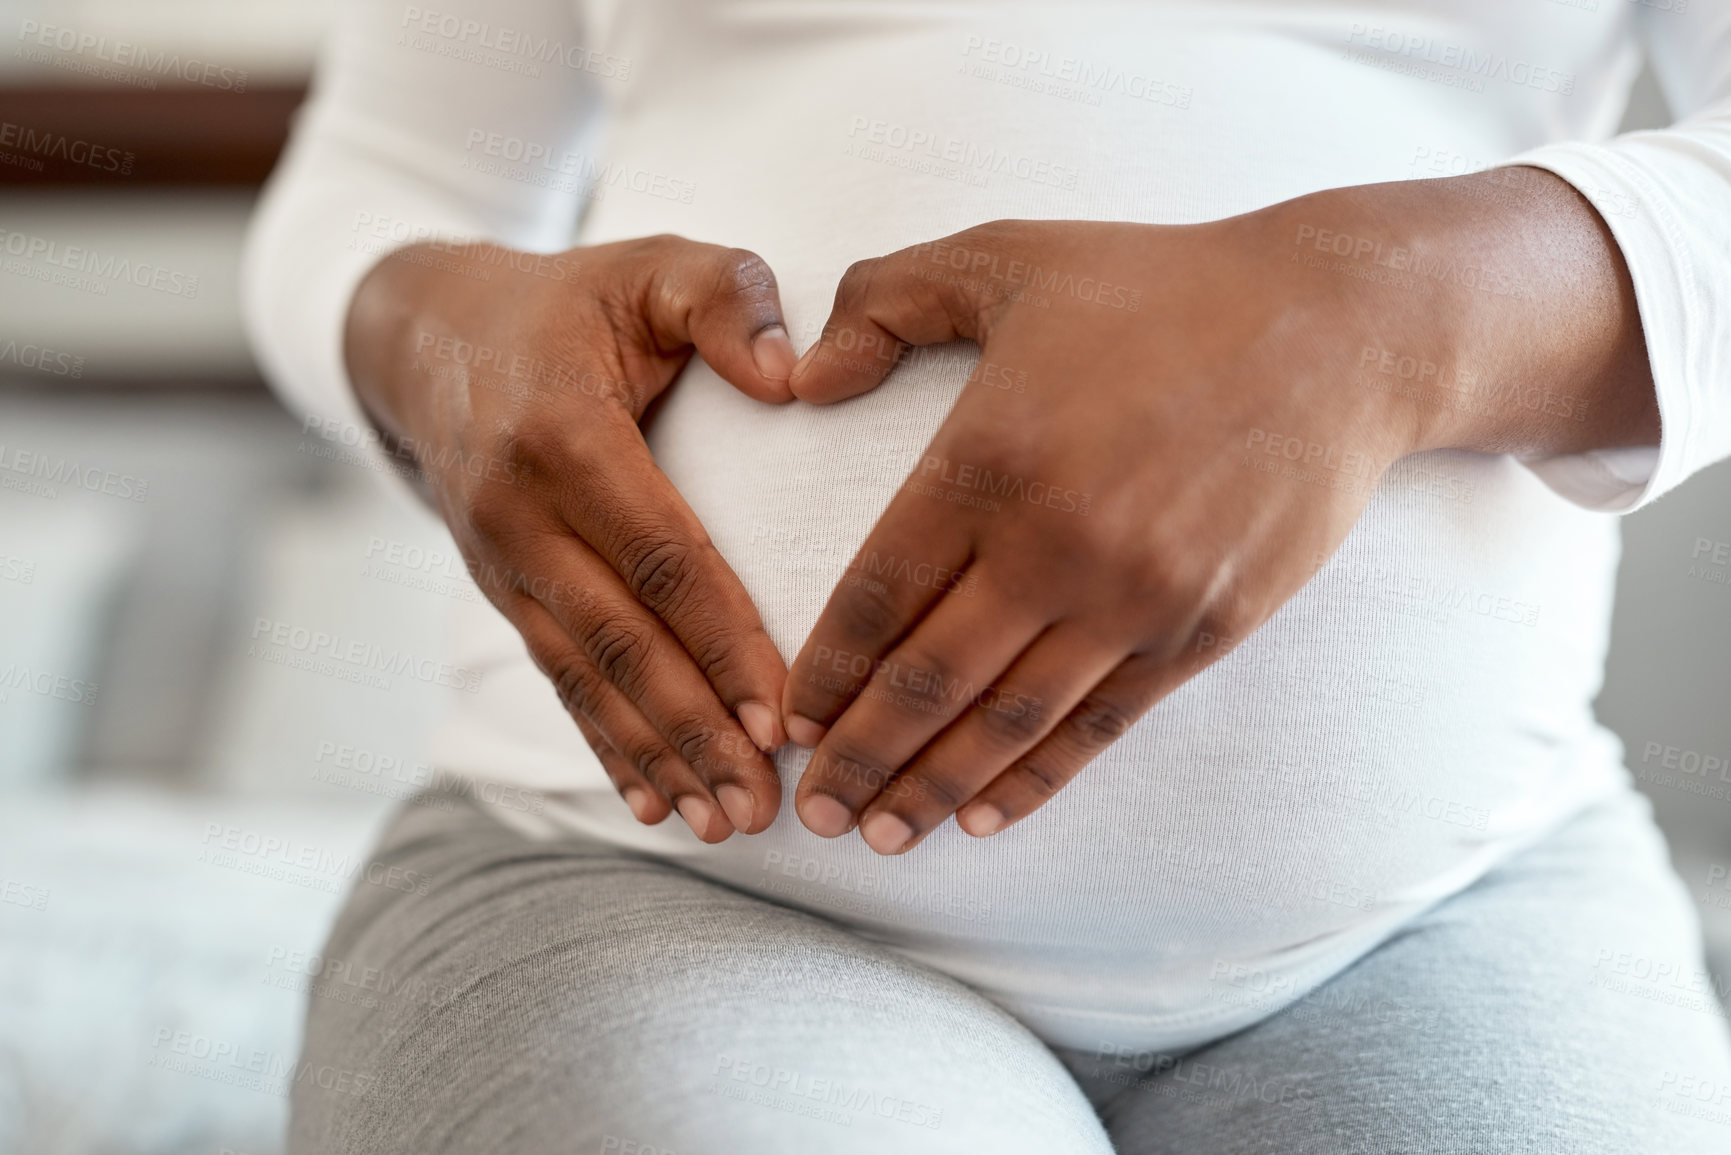 Buy stock photo Closeup shot of an unrecognisable woman making a heart shape with her hands on her pregnant belly at home